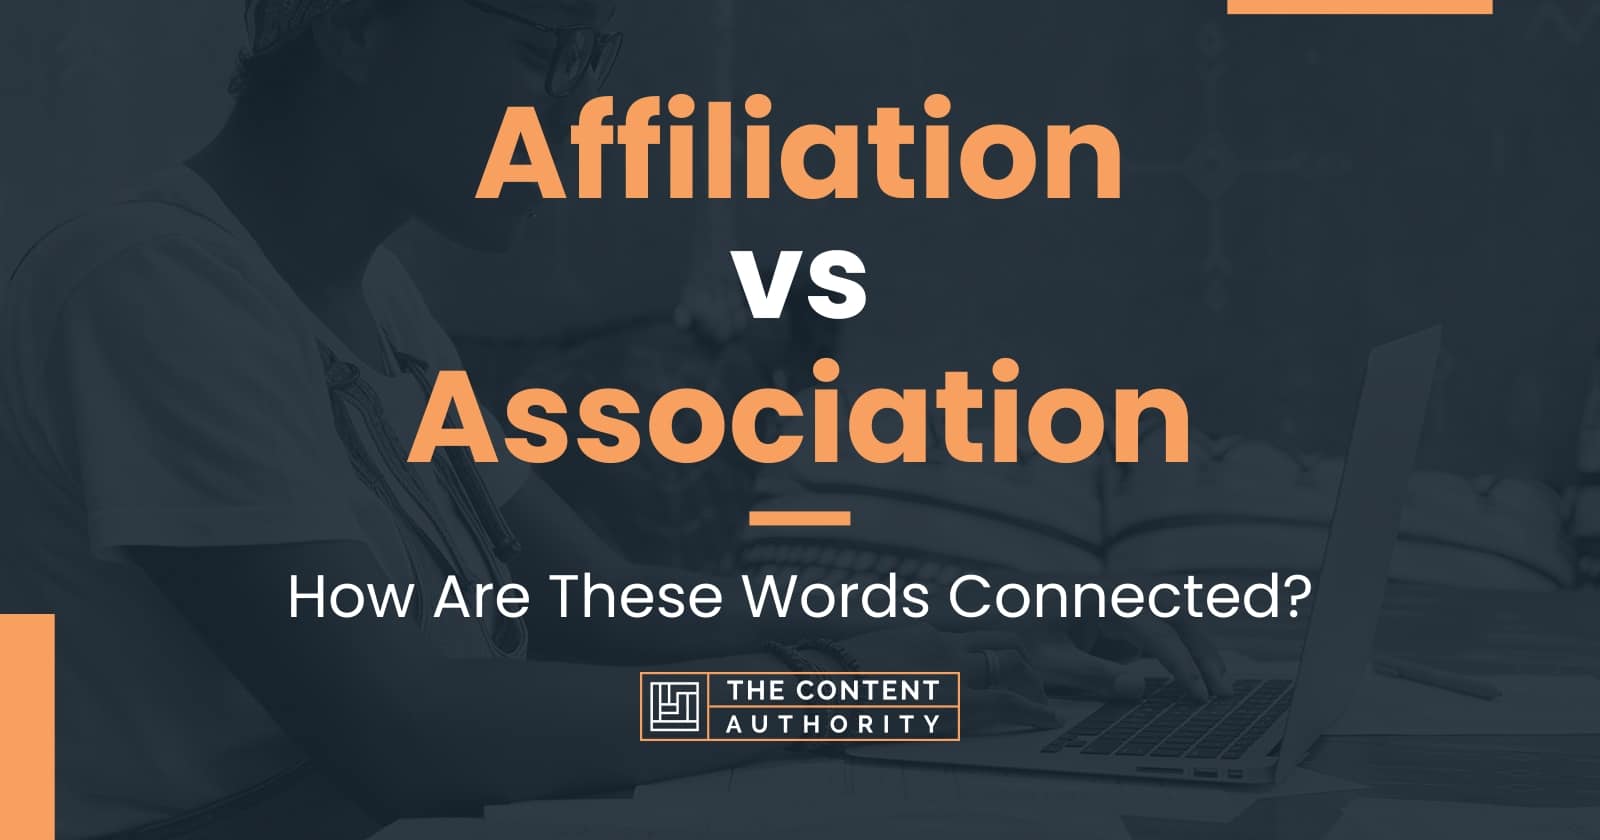 Affiliation vs Association: How Are These Words Connected?